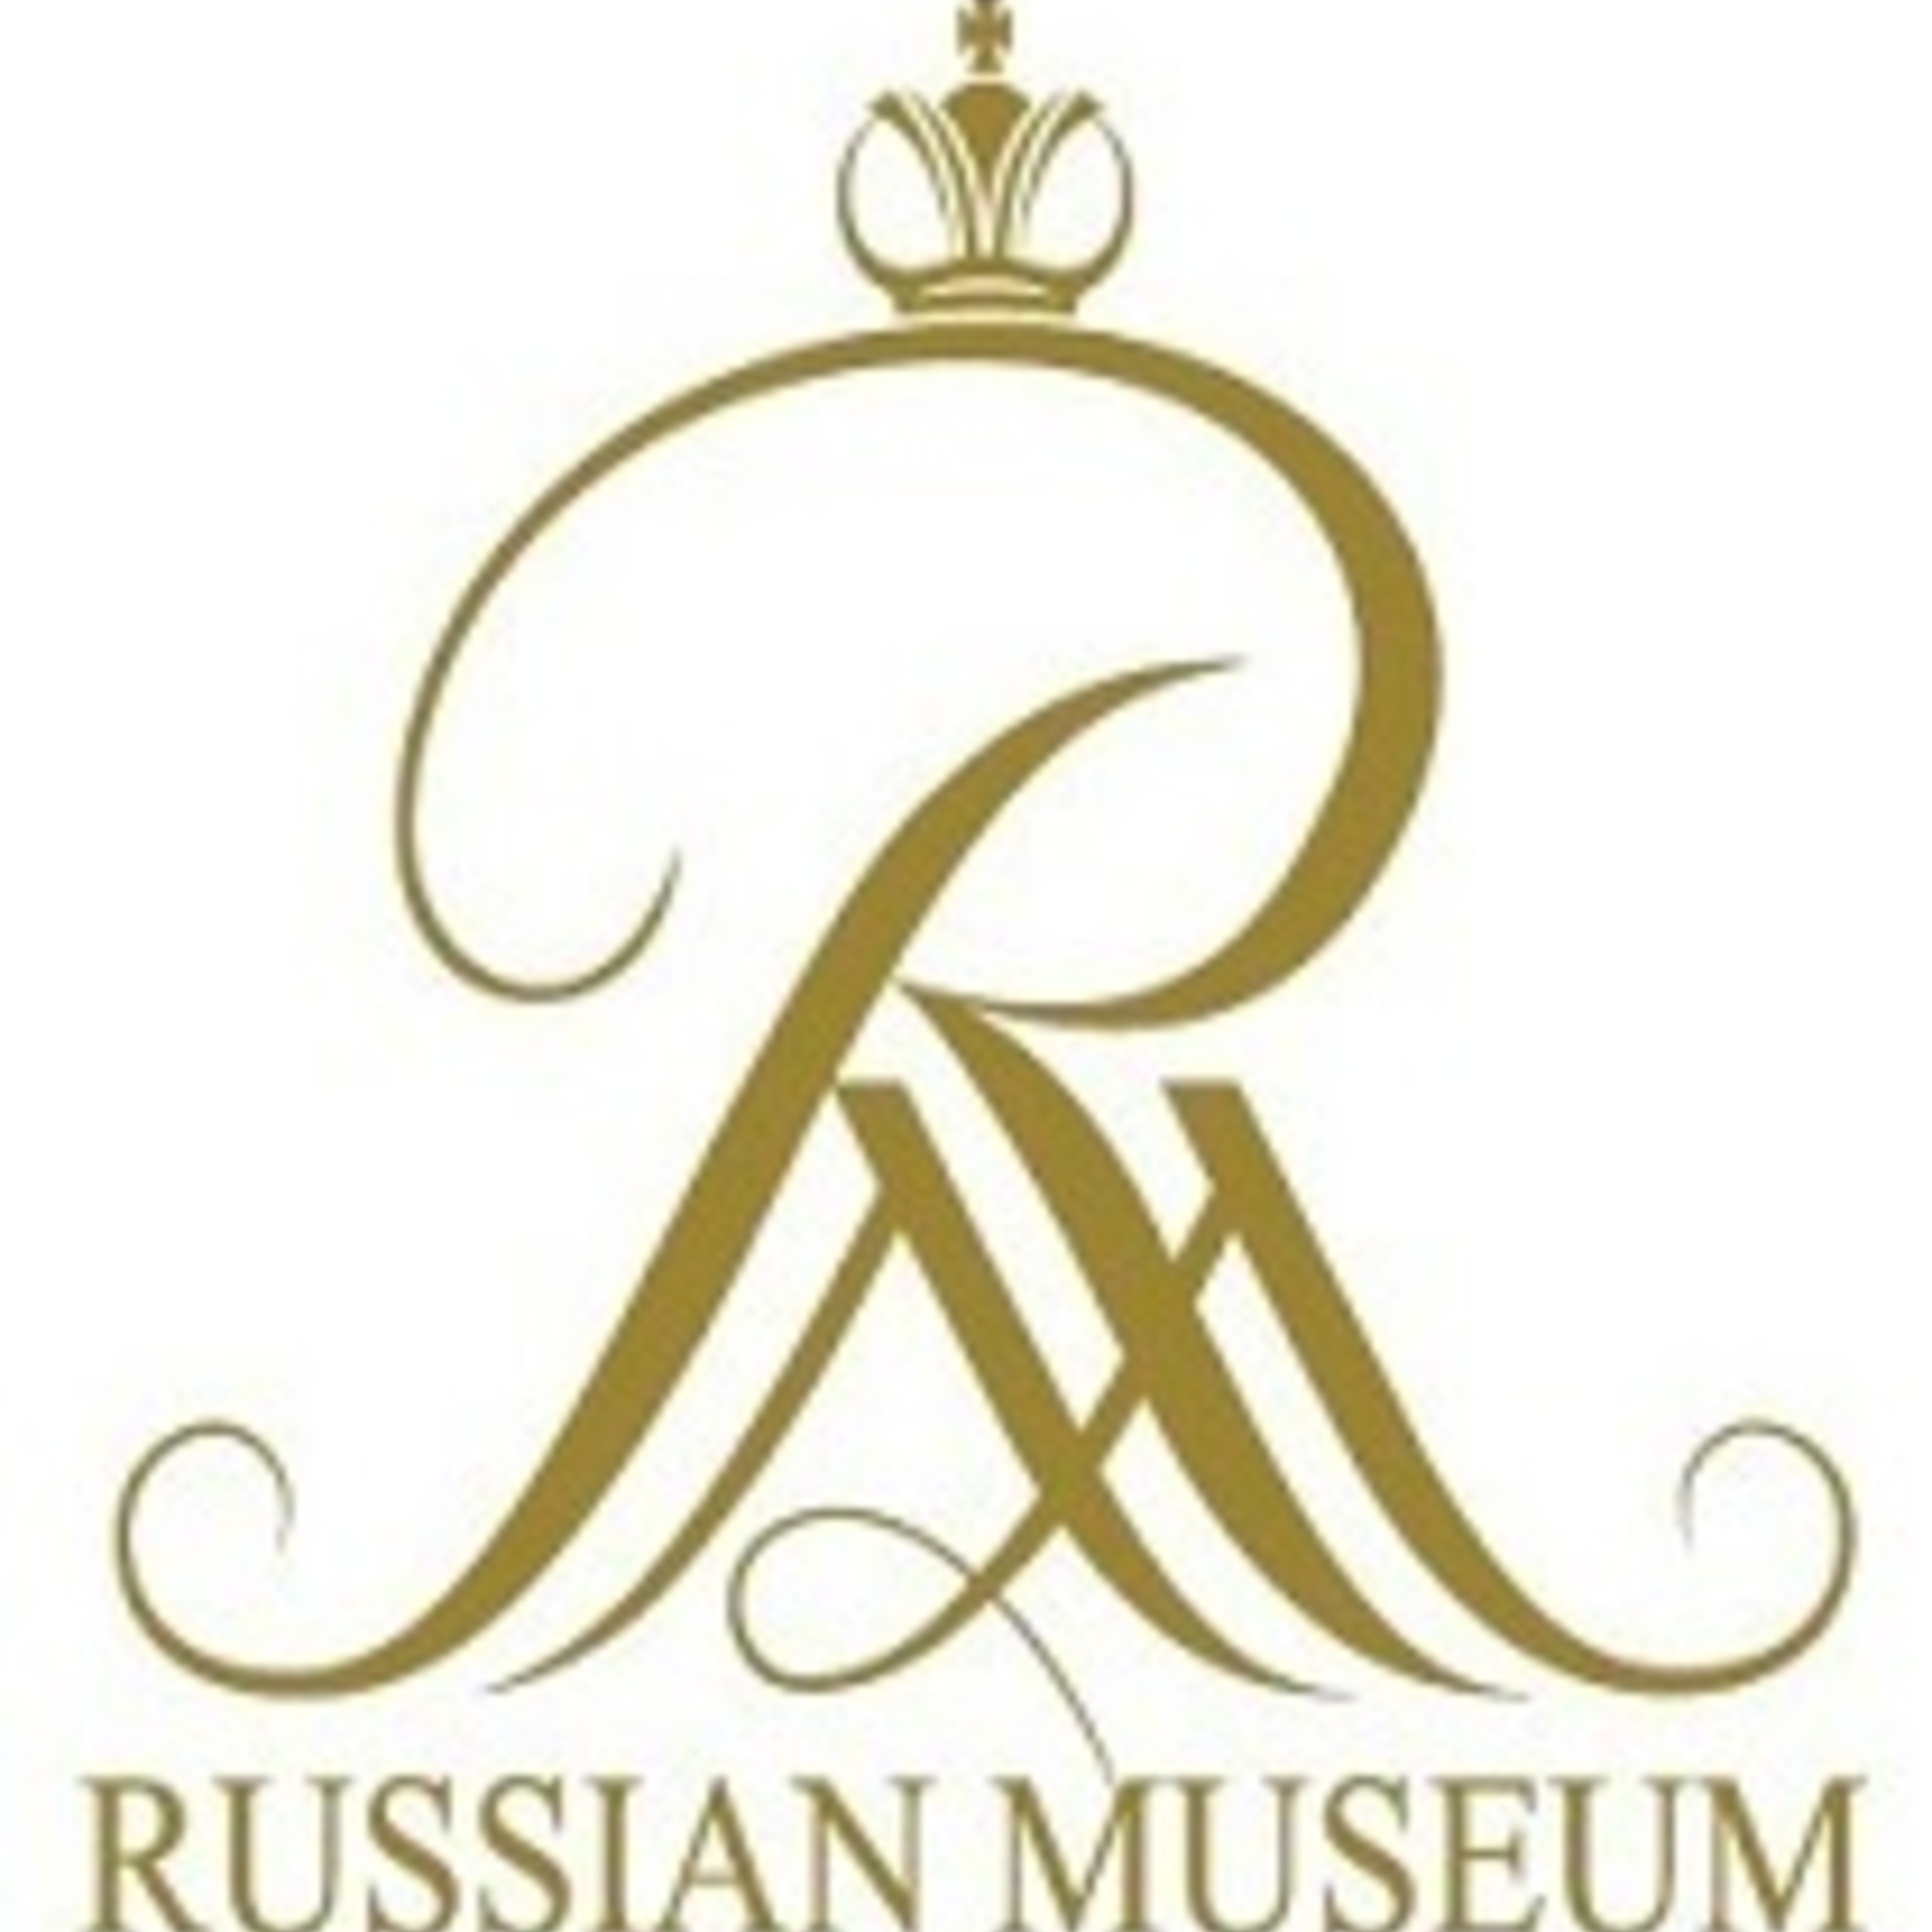 Russian Museum at the International Exhibition of books